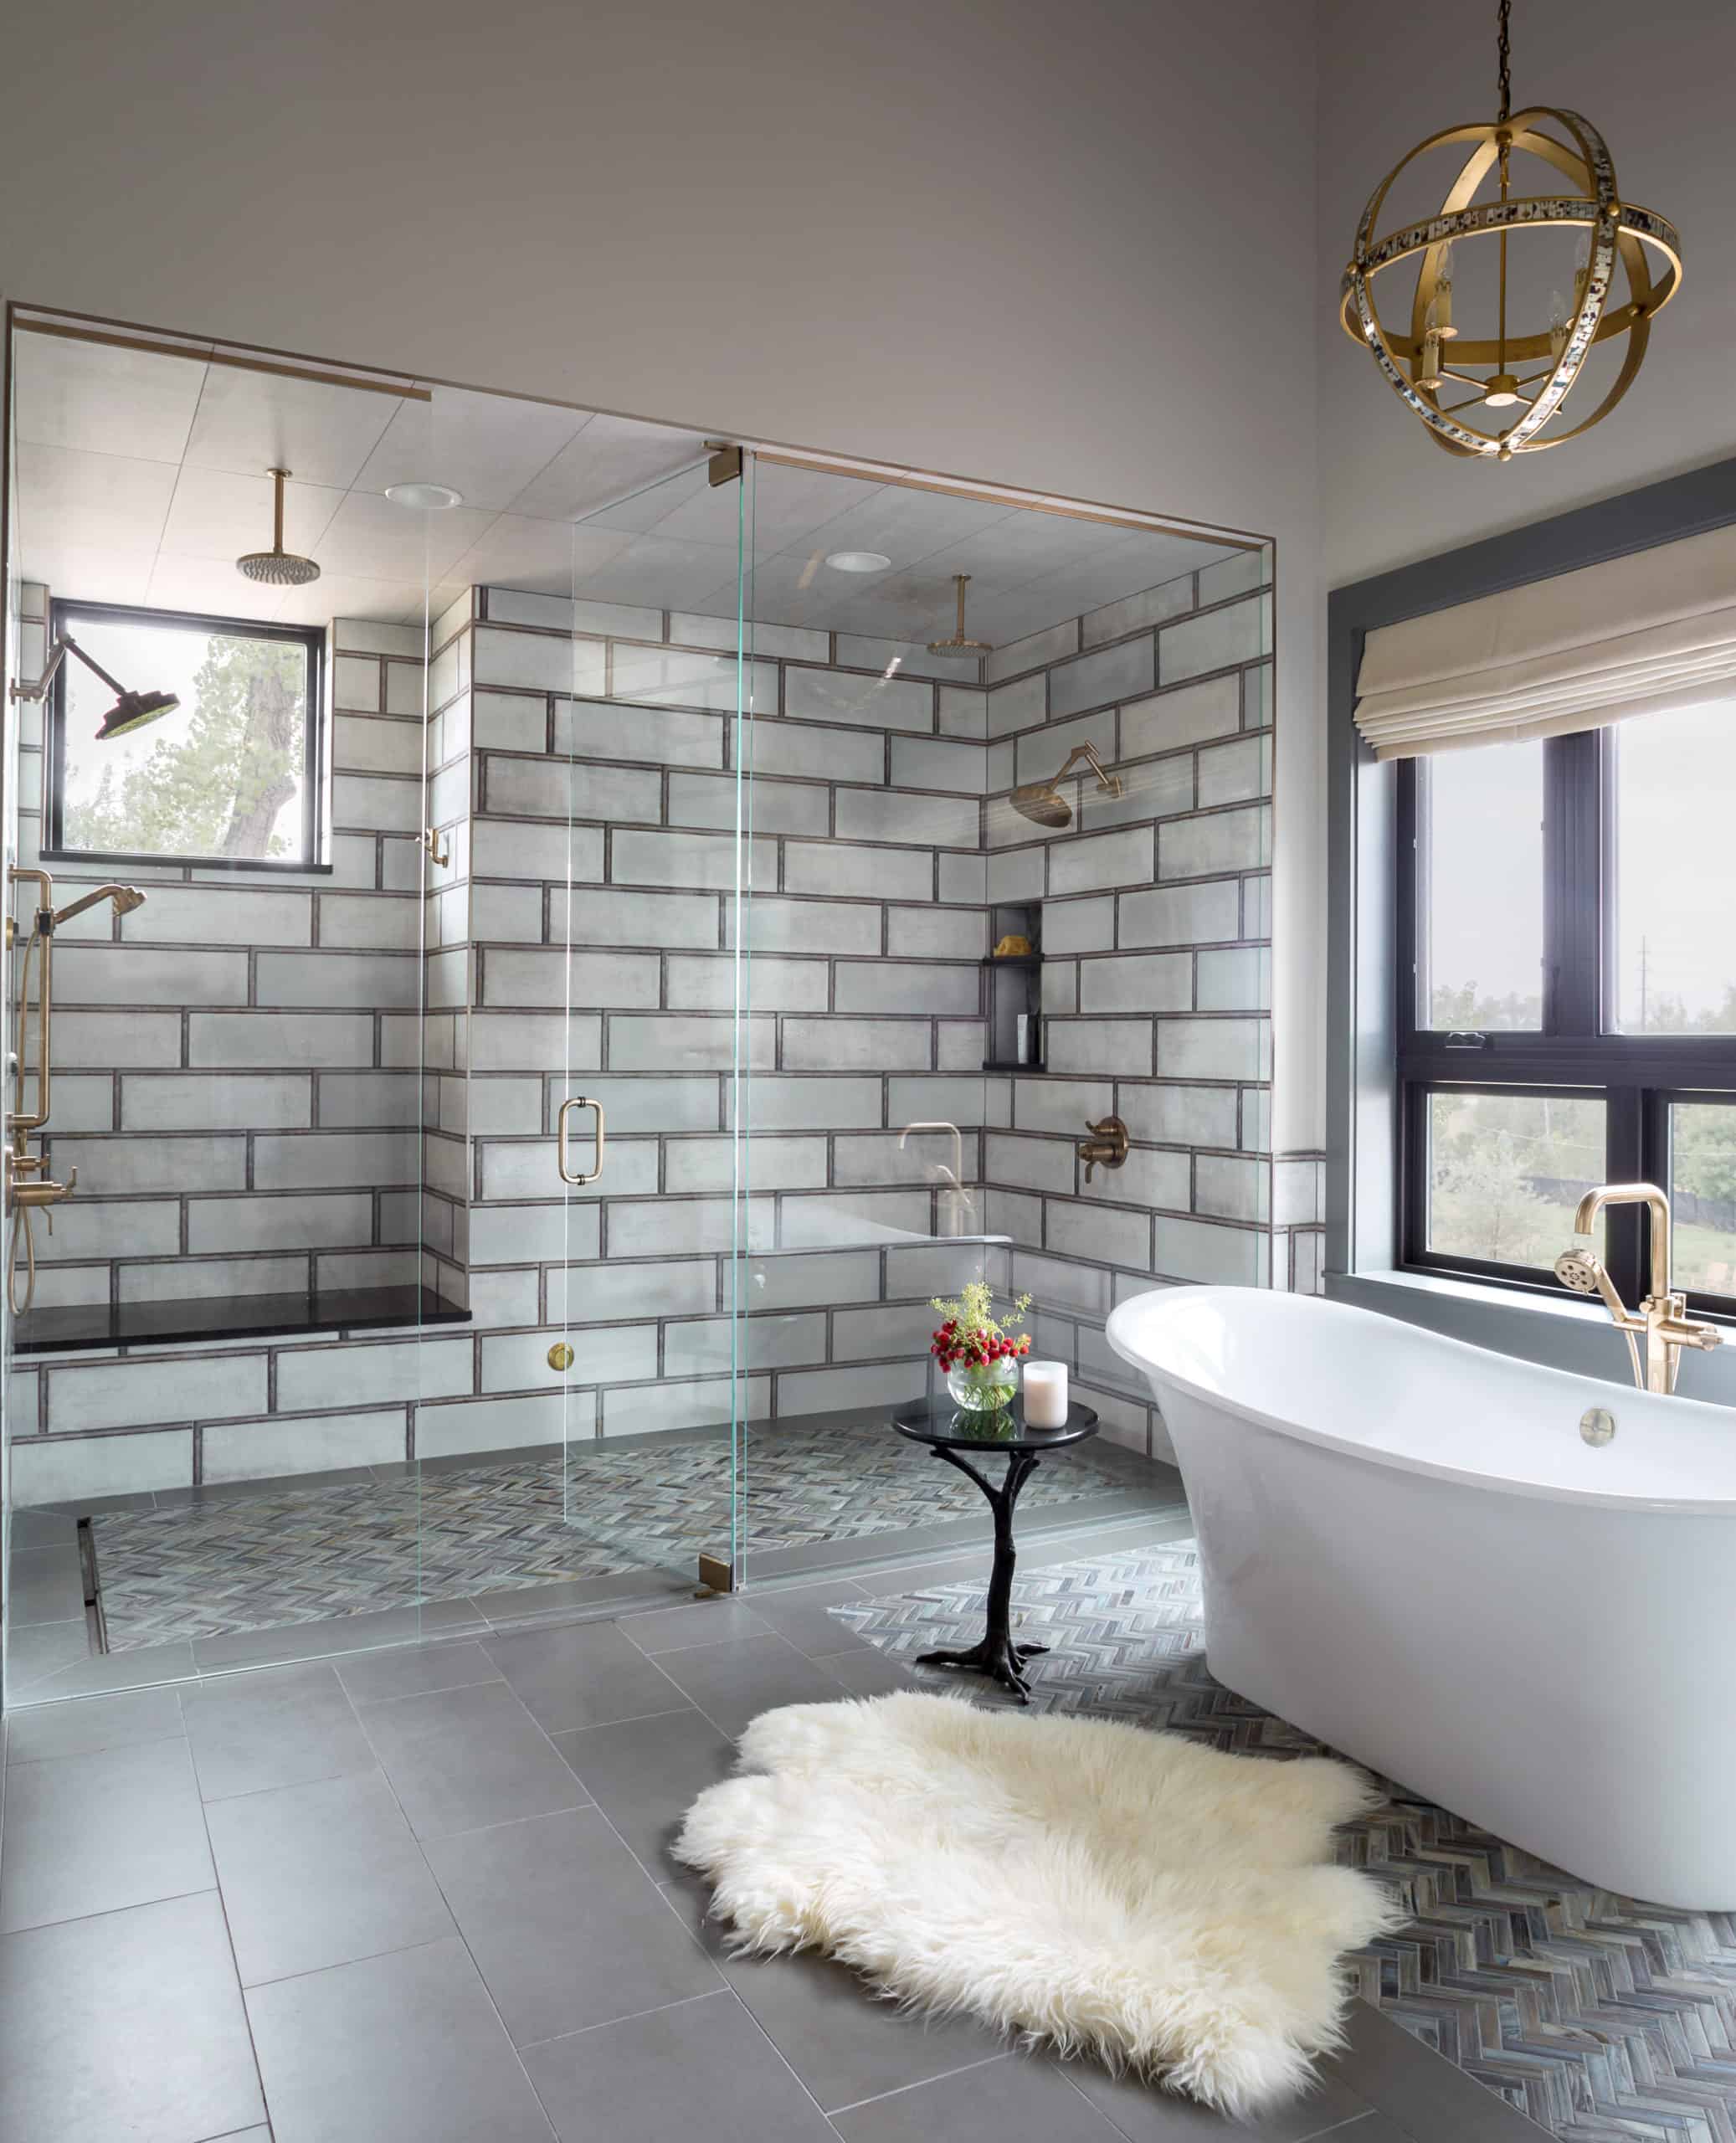 Spectacular master bathroom with large tiles and walk-in shower